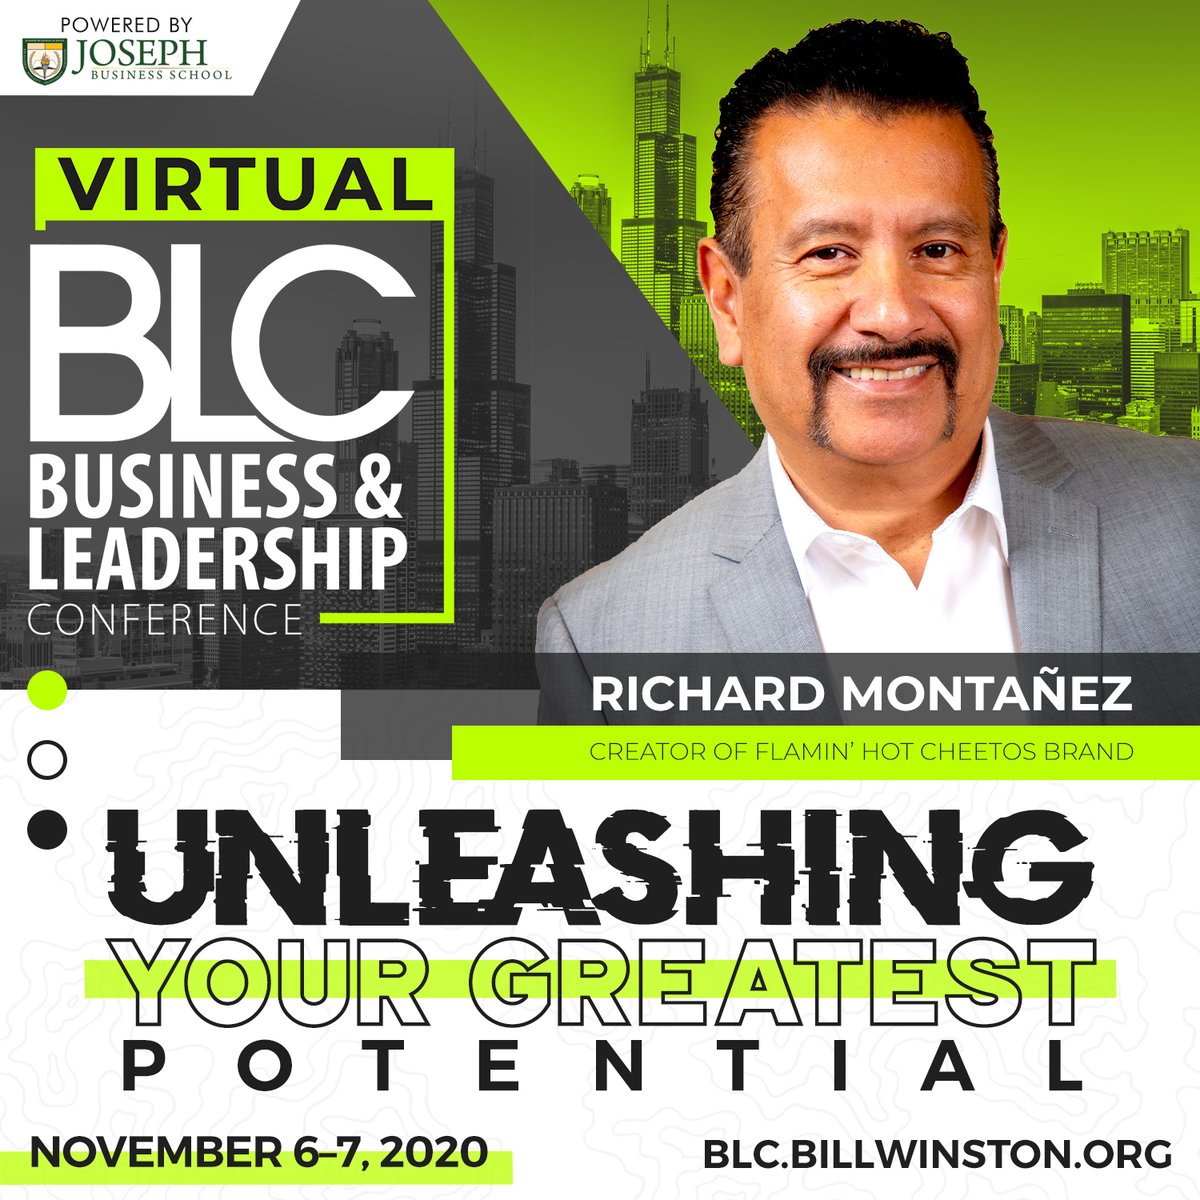 Richard Montañez started his PepsiCo career at Frito-Lay in 1976 as a janitor and is recognized as the creator of the #FlaminHot line of products, which have become a billion-dollar business! Join us and hear his inspiring story at the 2020 @BLCJBS! blc.billwinston.org